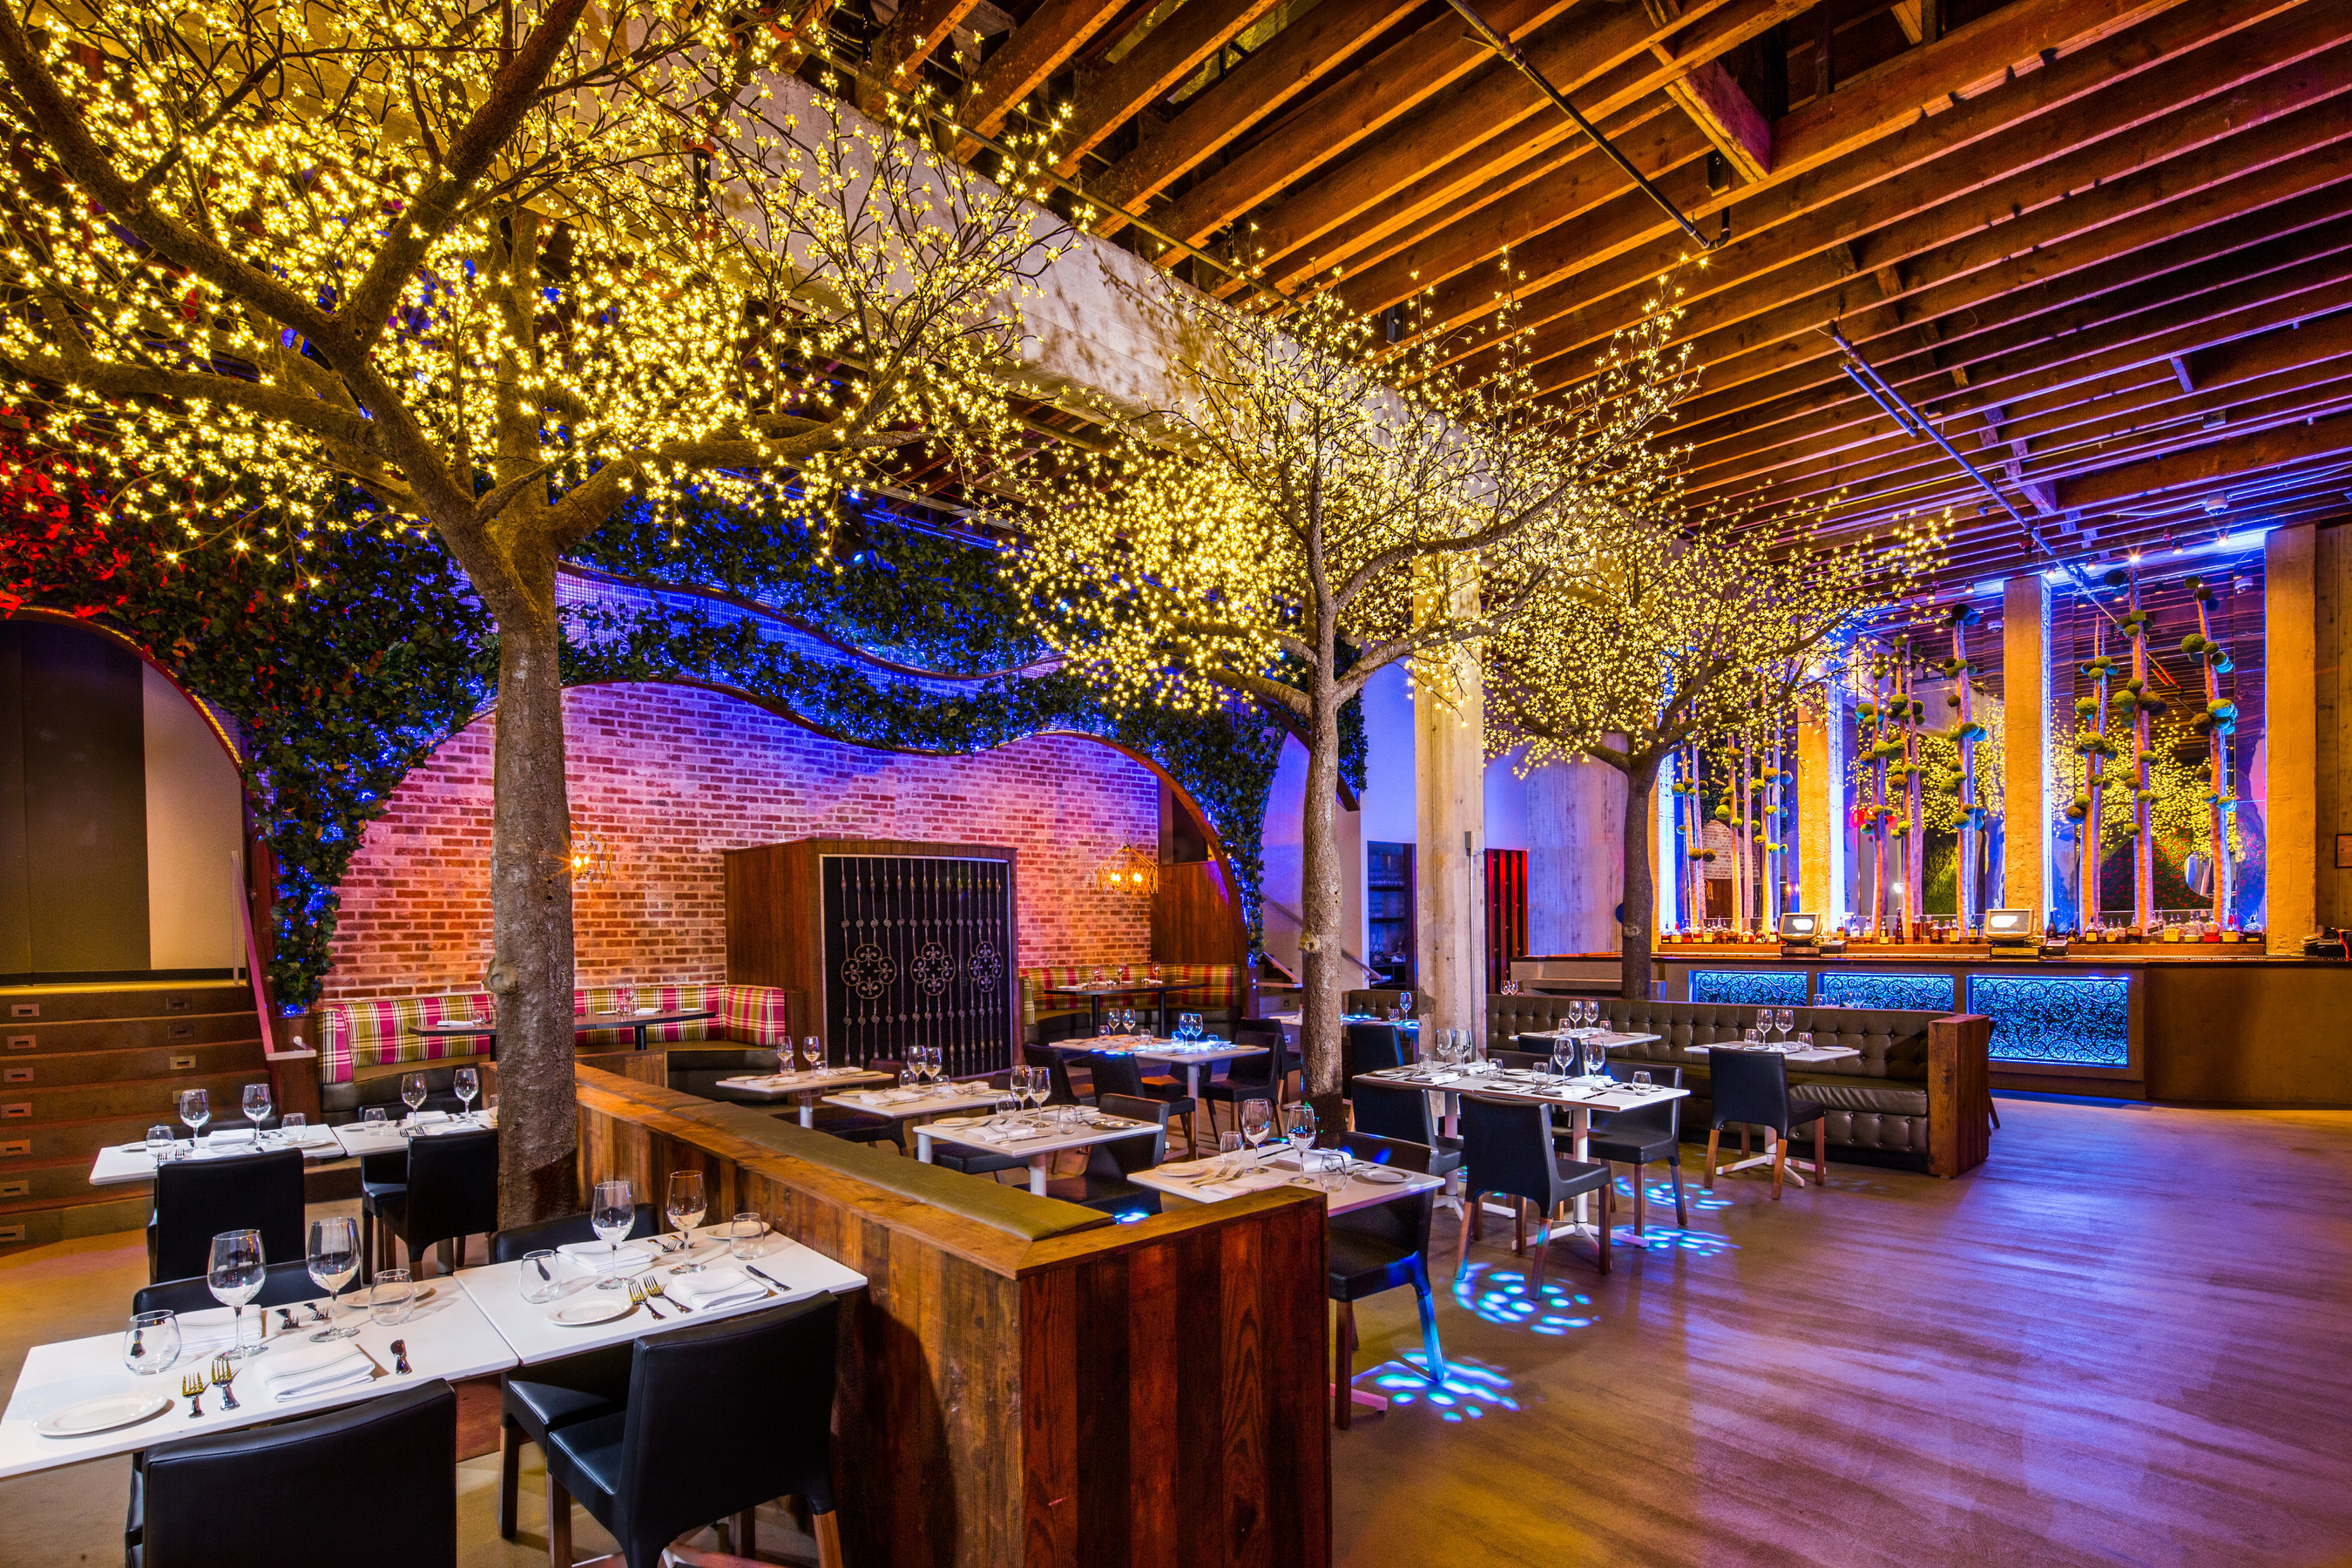 Interior of the newly designed Parq Restaurant, from world-renowned interior design firm Davis Ink., features a mix of raw, organic elements like reclaimed wood, custom yucca trees, and various types of greenery with industrial materials like concrete, aged brick, and metal mesh.